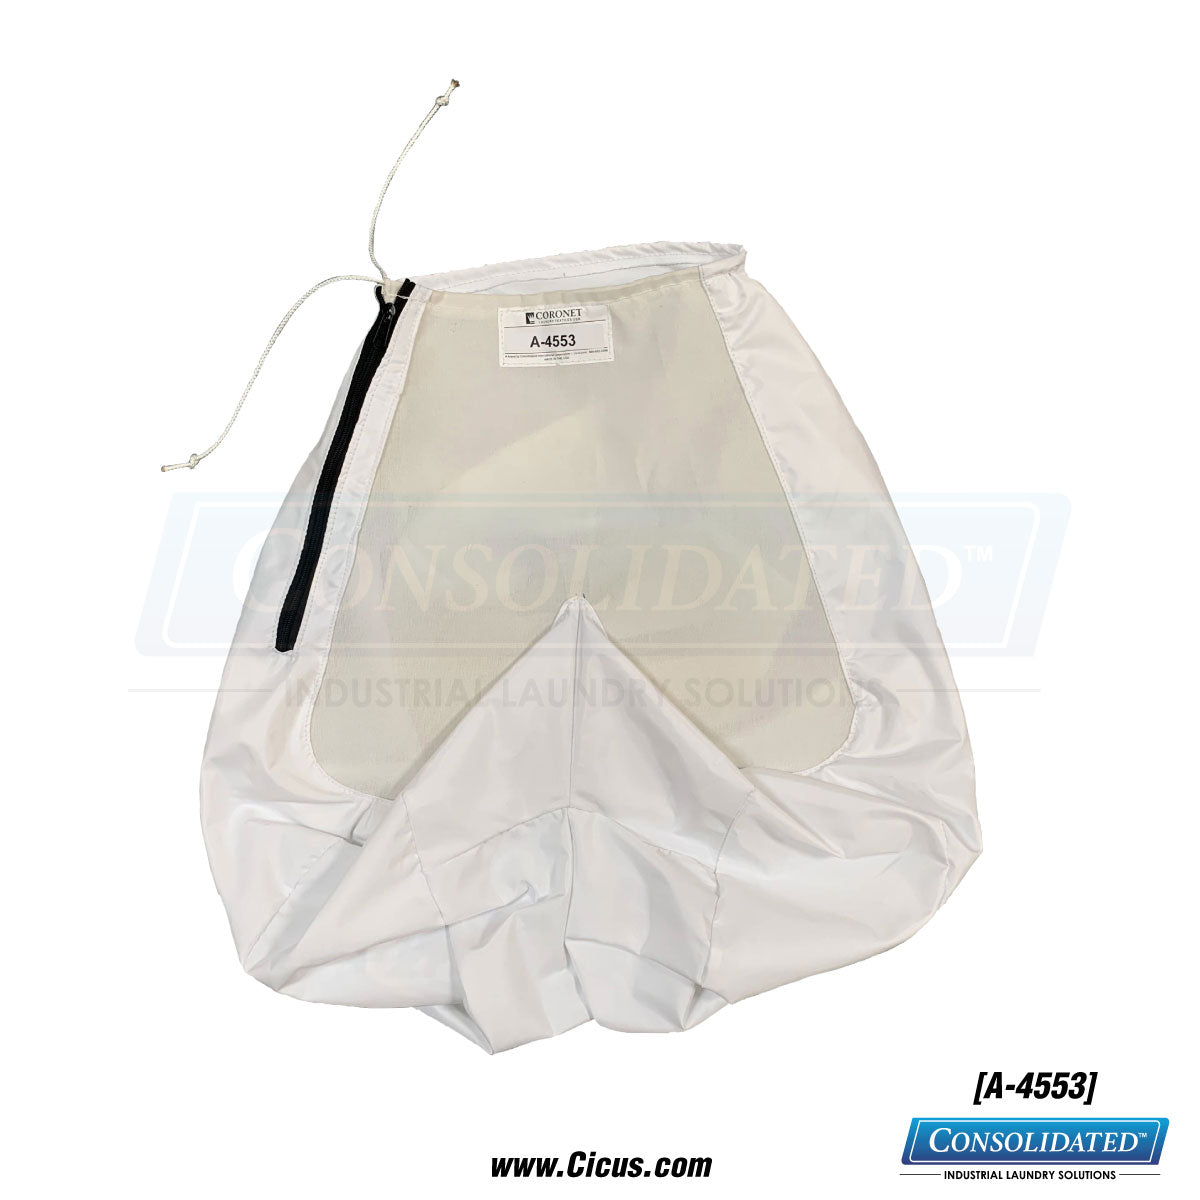 Forenta Airbag Civer / steam Expansion Bag [A-4553] - Front View